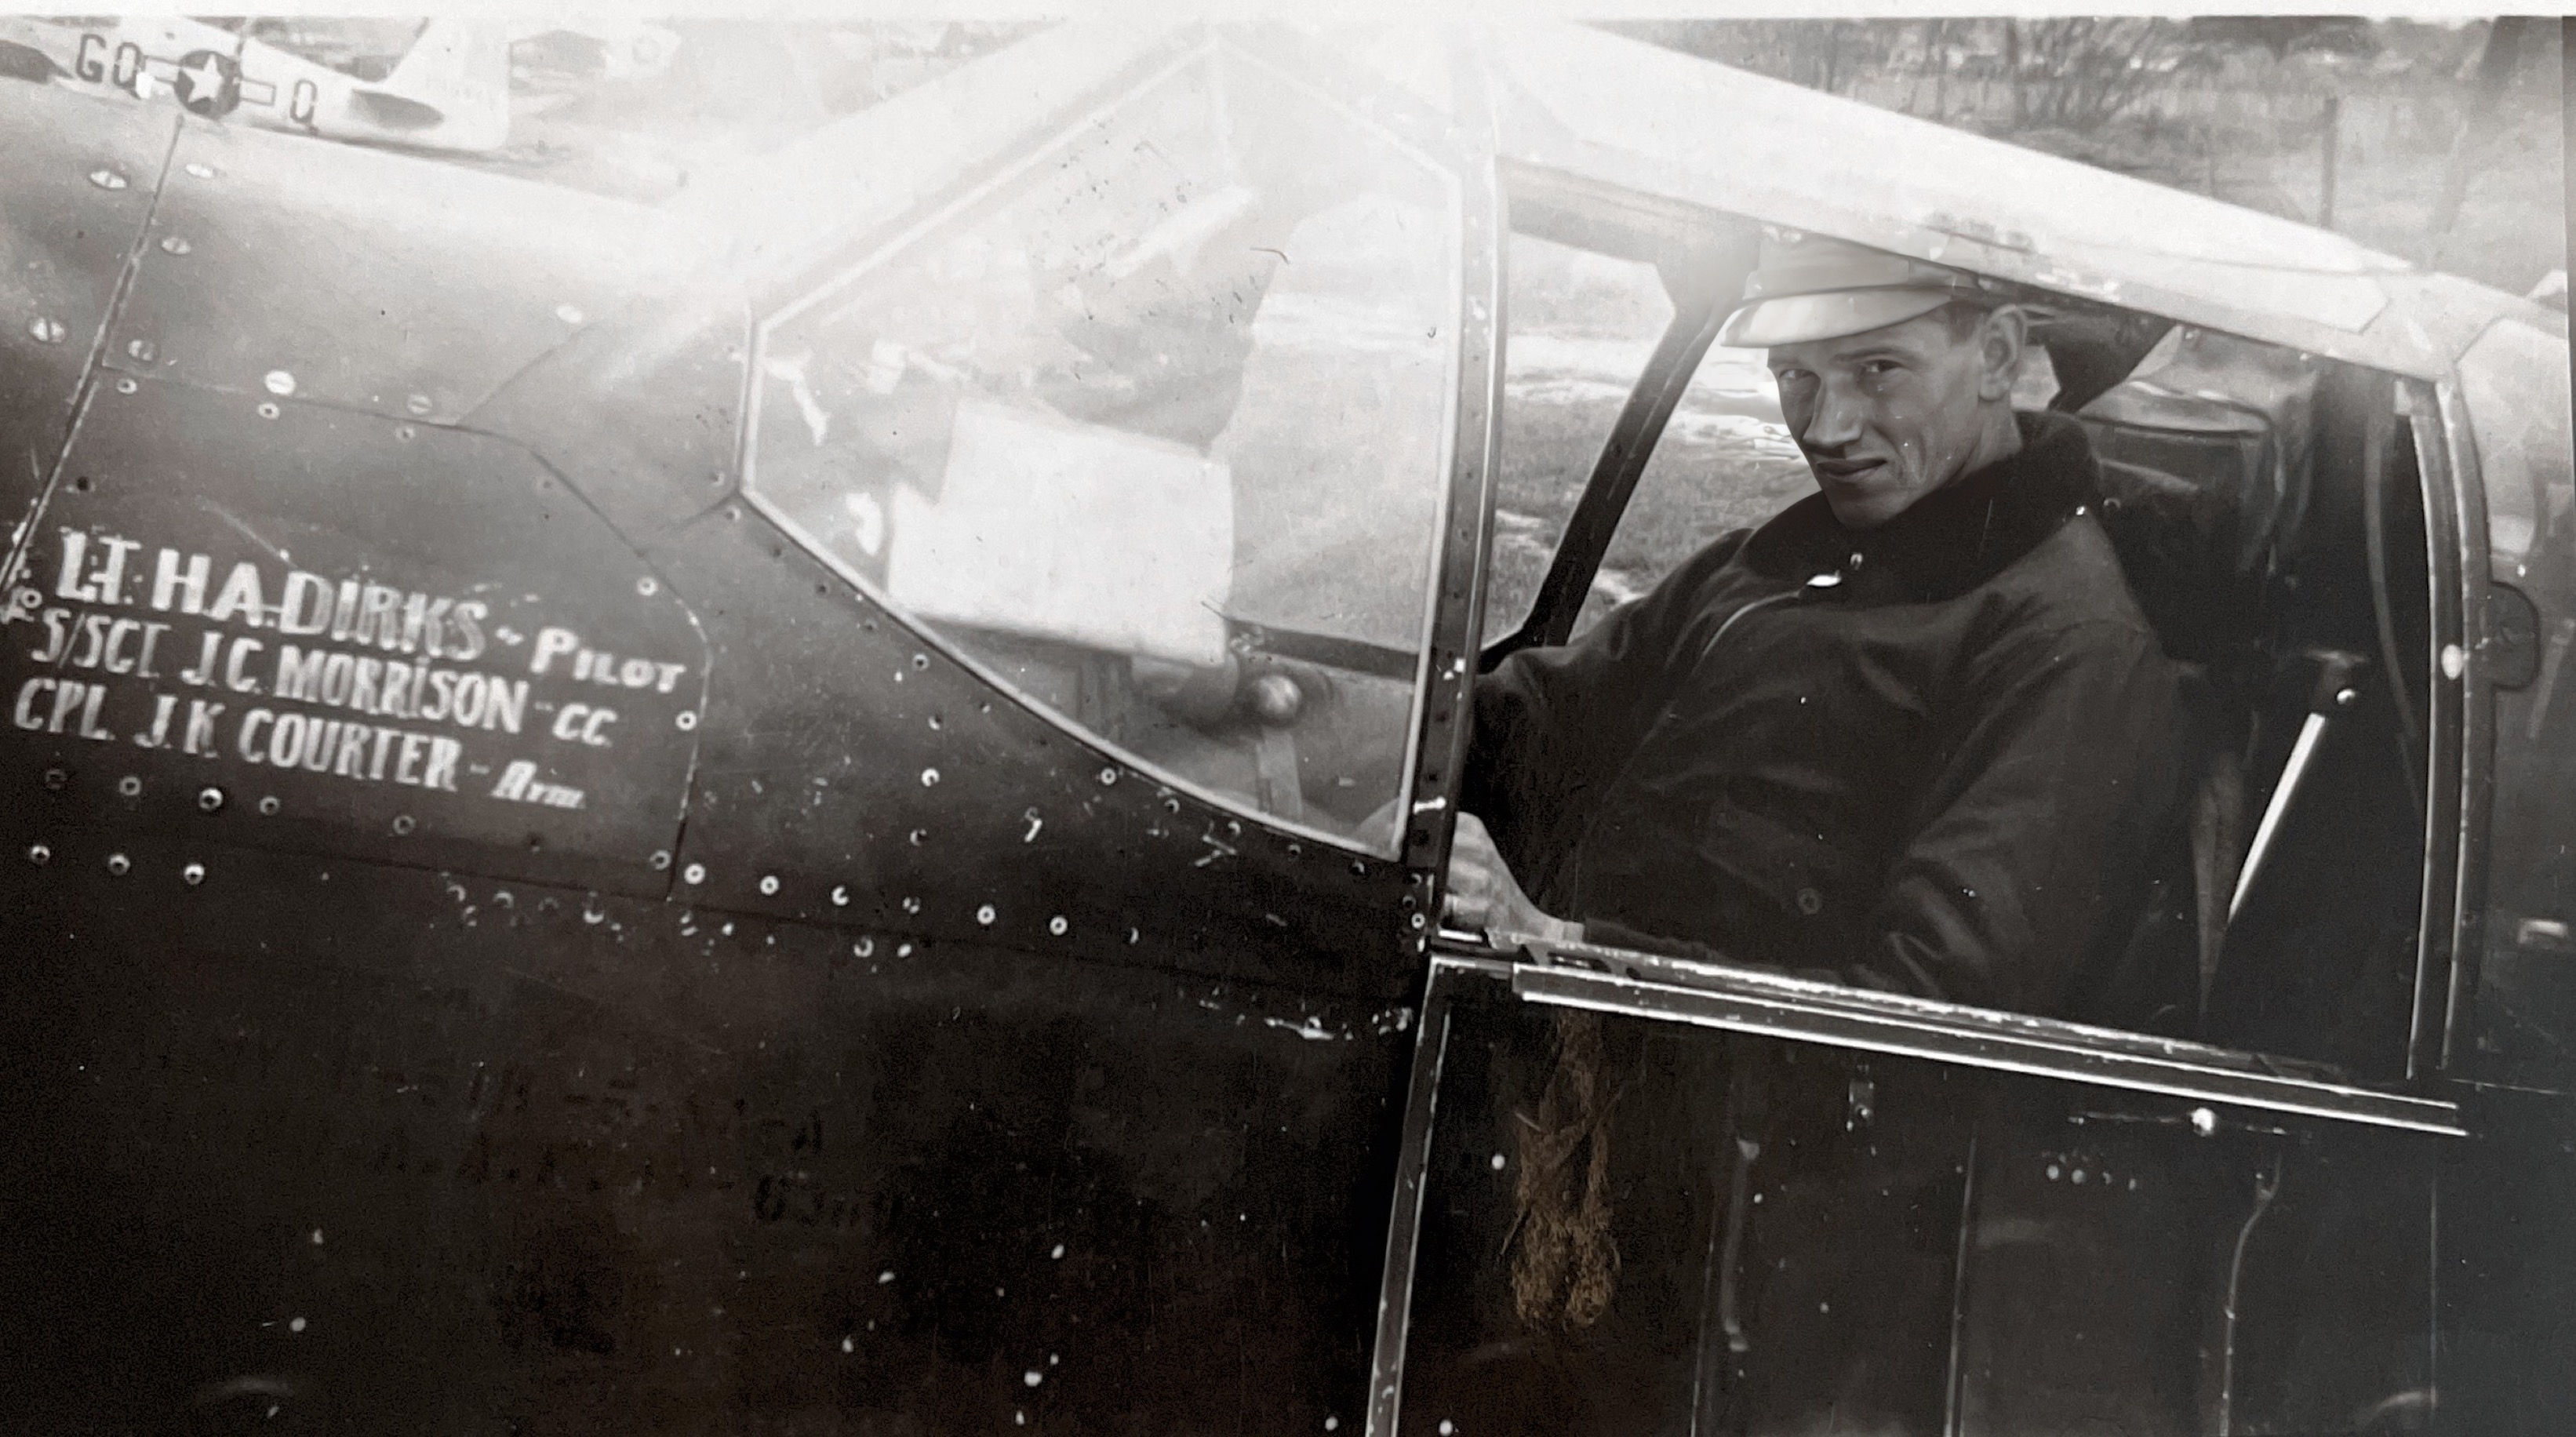 My great uncle, Howard Dirks, in his fighter plane taken in England in 1944.